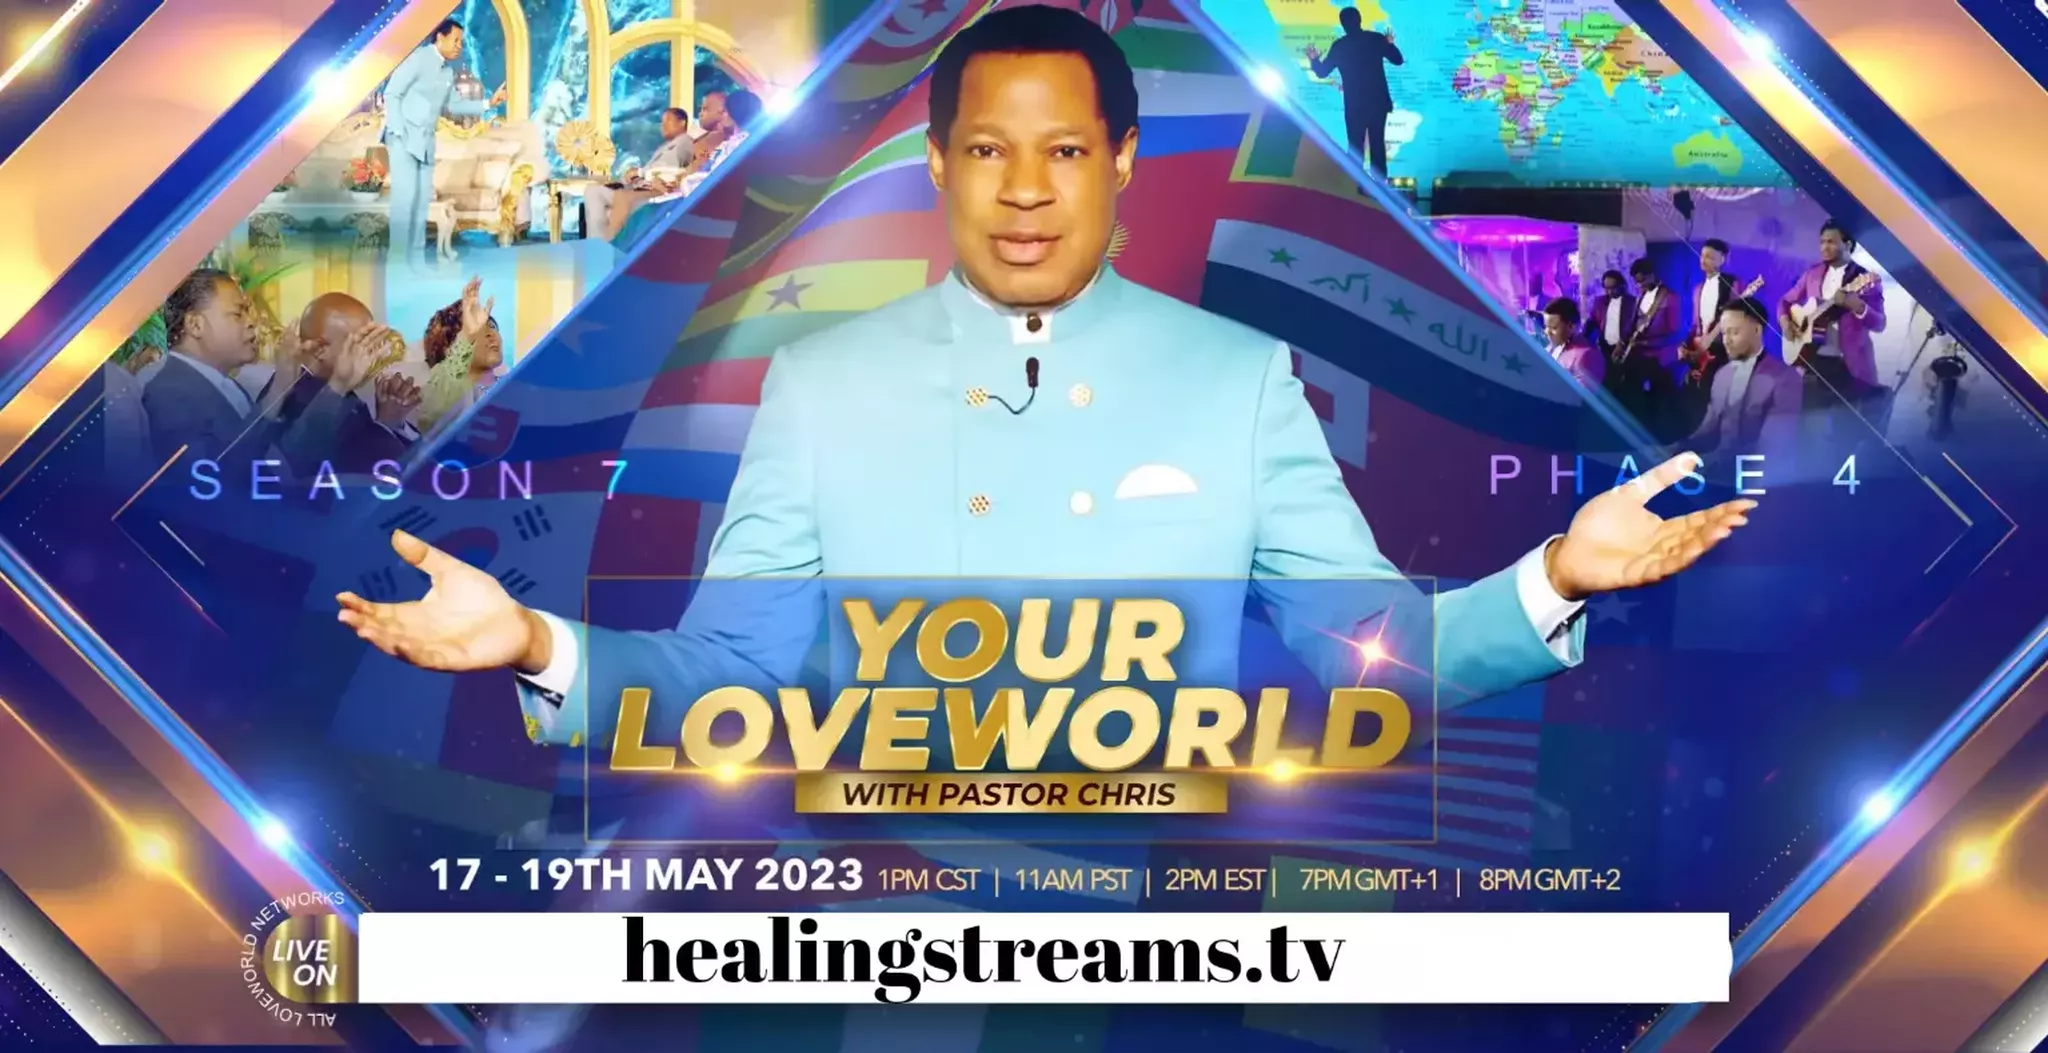 IT’S TIME TO BE ENLIGHTENED AT YOUR LOVEWORLD SPECIALS WITH PASTOR CHRIS	